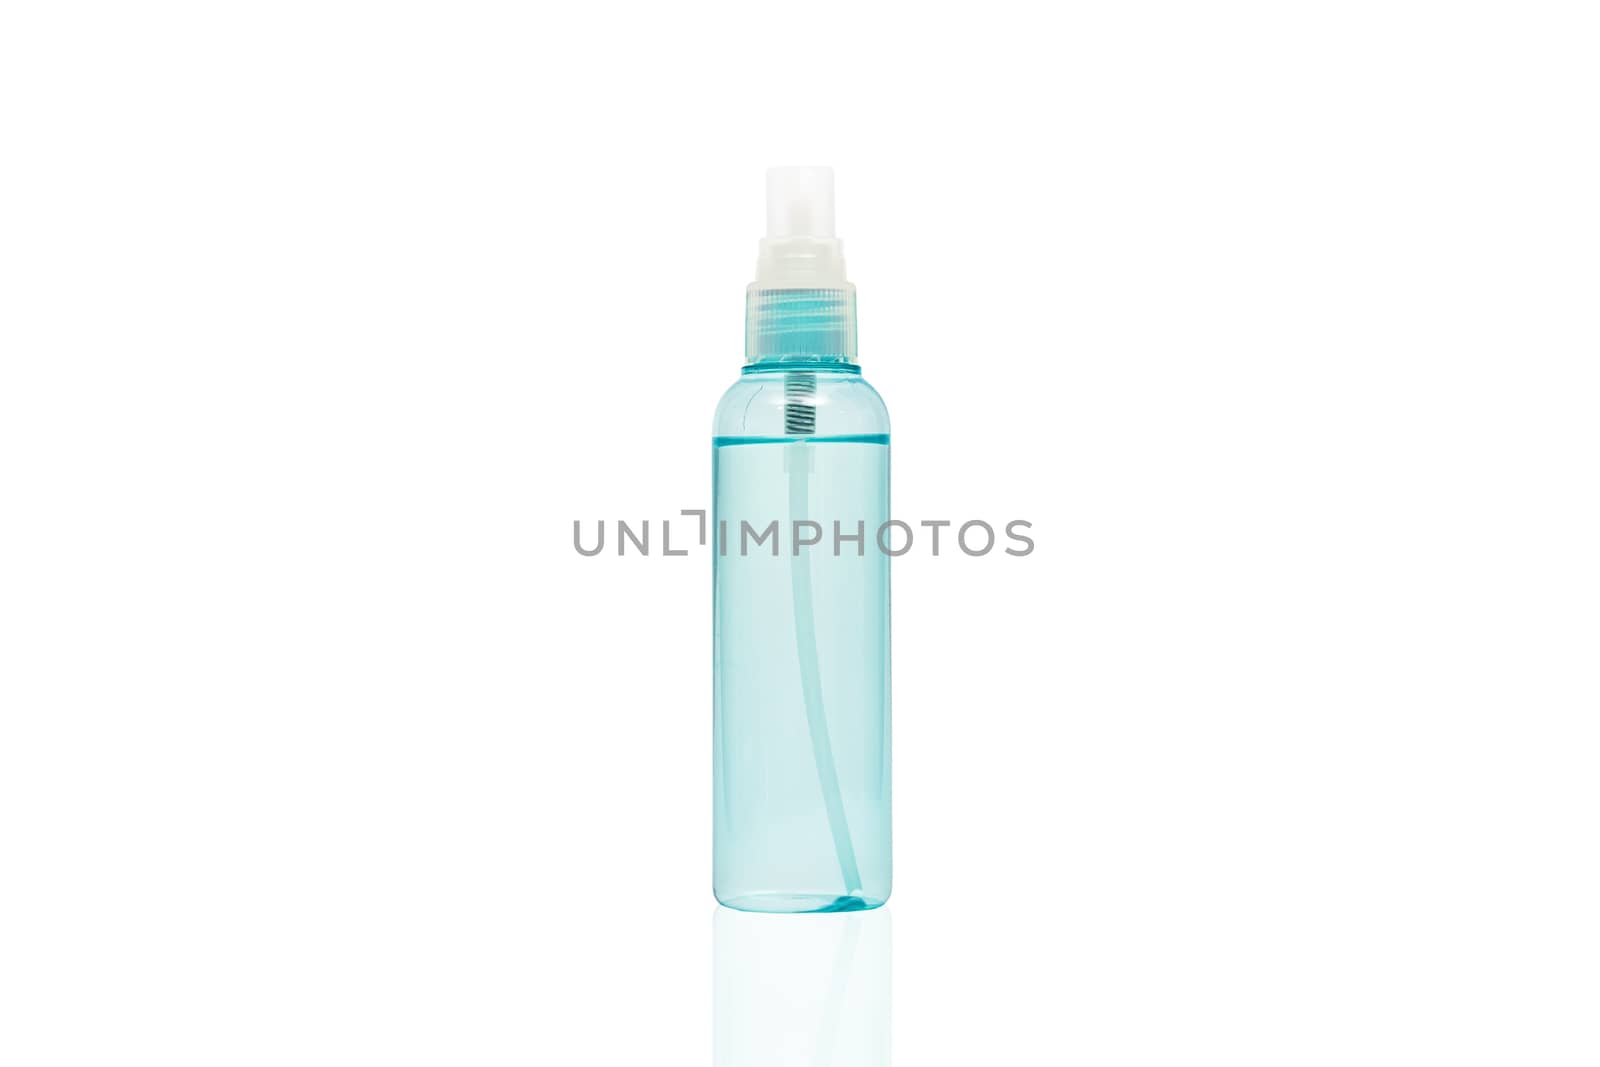 sanitizer alcohol spray in transparent plastic bottle spray injection isolated on white background for disinfection, prevent spread of germs during infection of COVID-19 Coronavirus outbreak situation